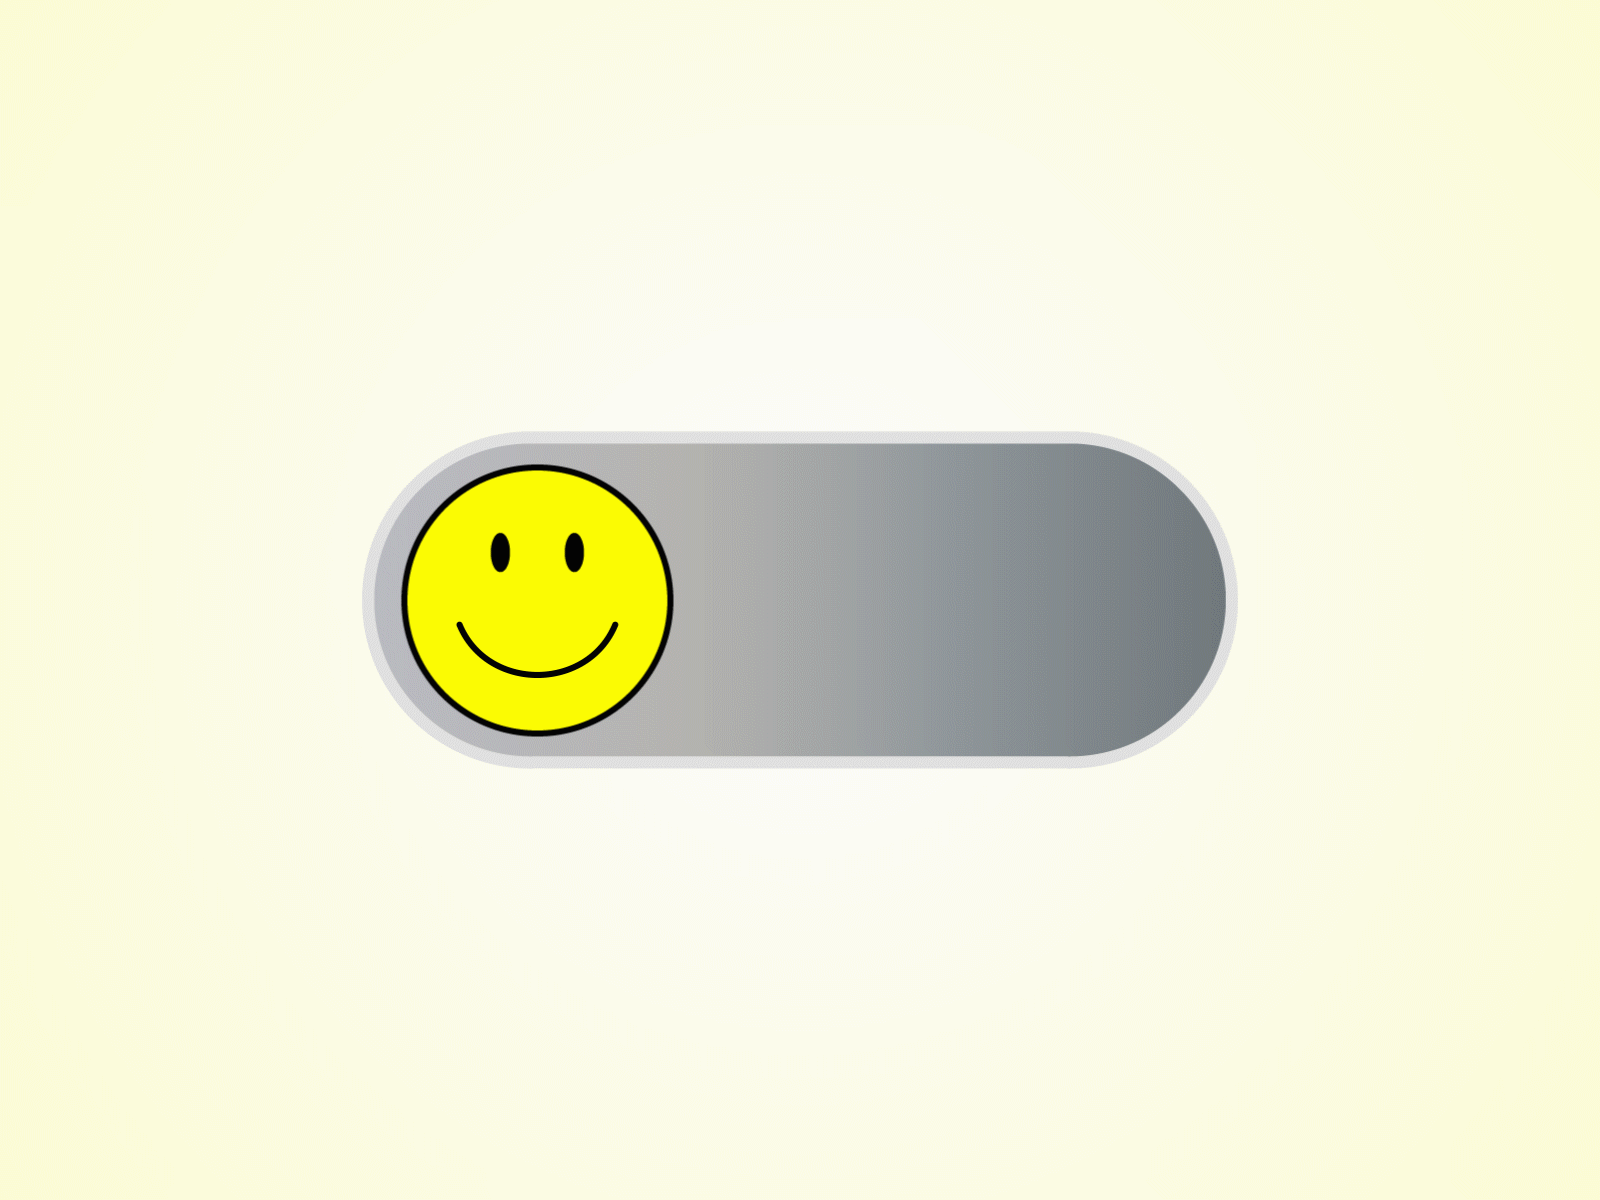 UI 015 015 aftereffects dailyui design face smiley face ui